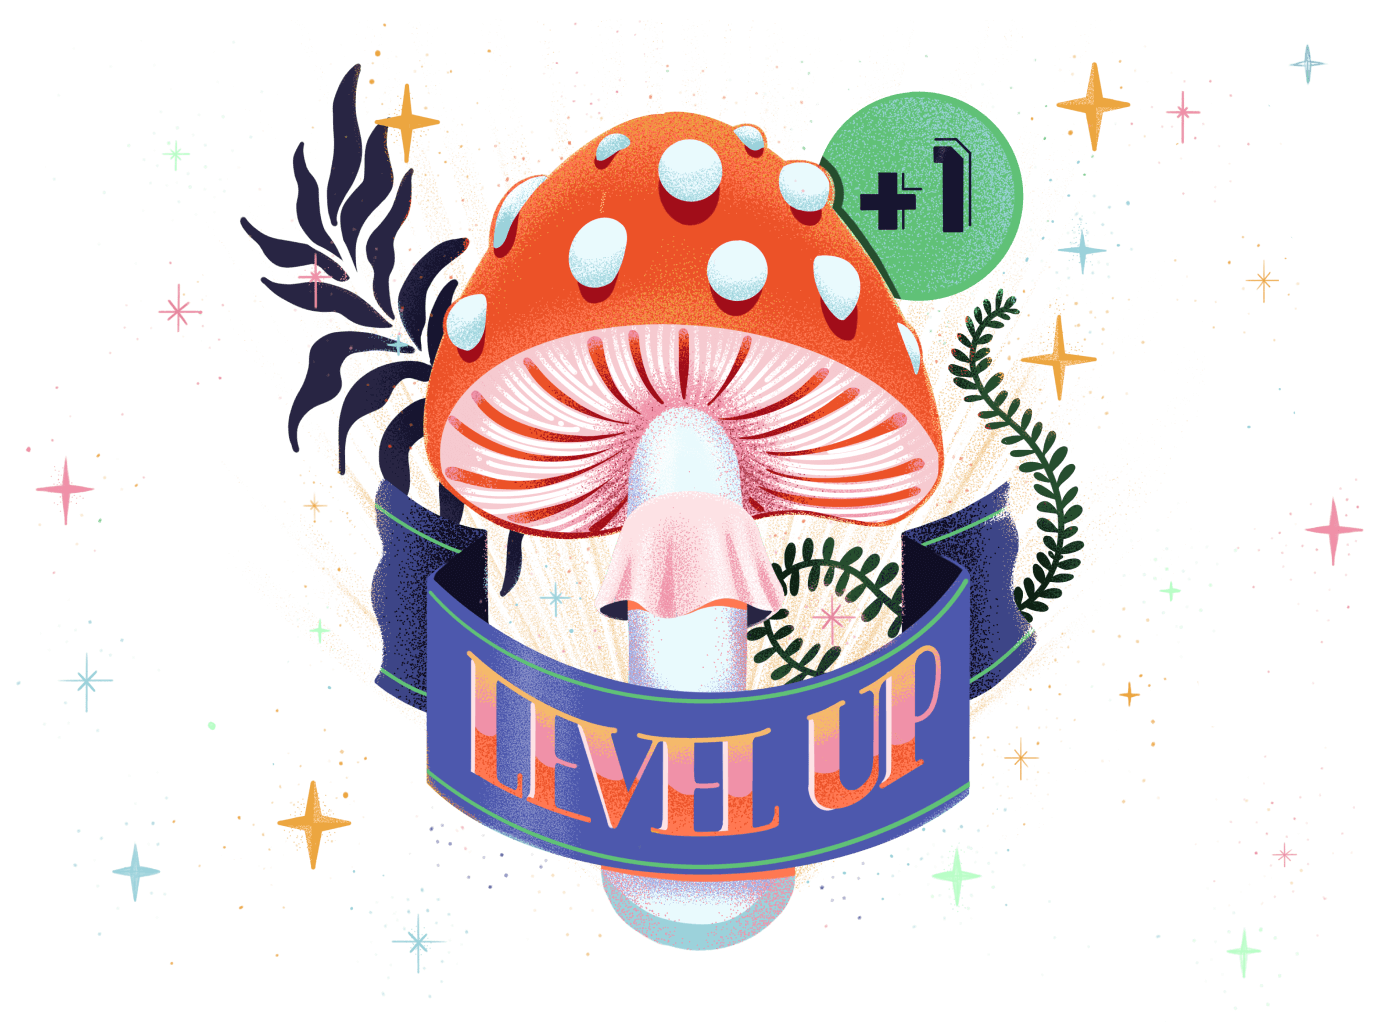 illustration of amanita muscoria mushroom with a level up label and little floating stars around it